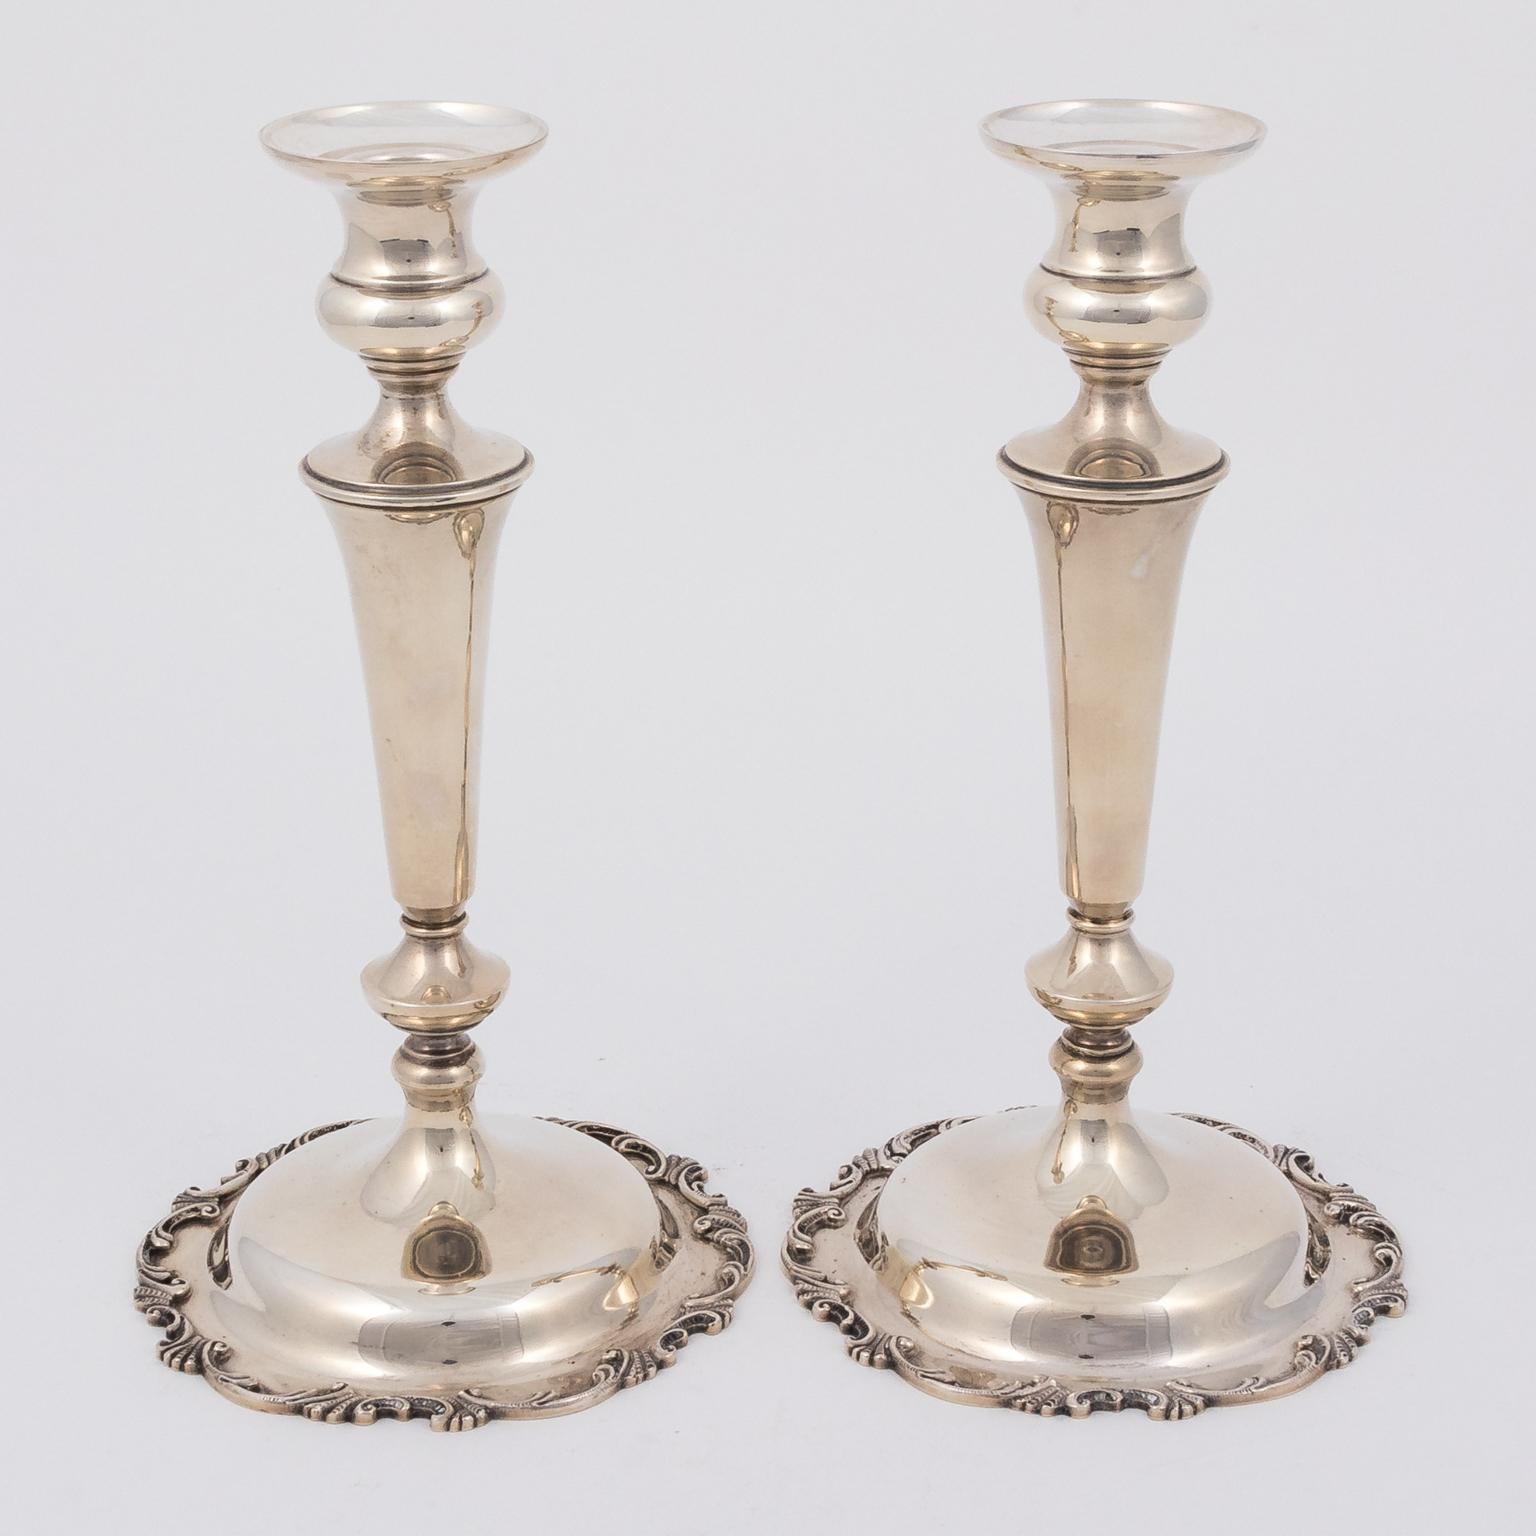 20th Century Durgin Rare Sterling Silver Candlesticks